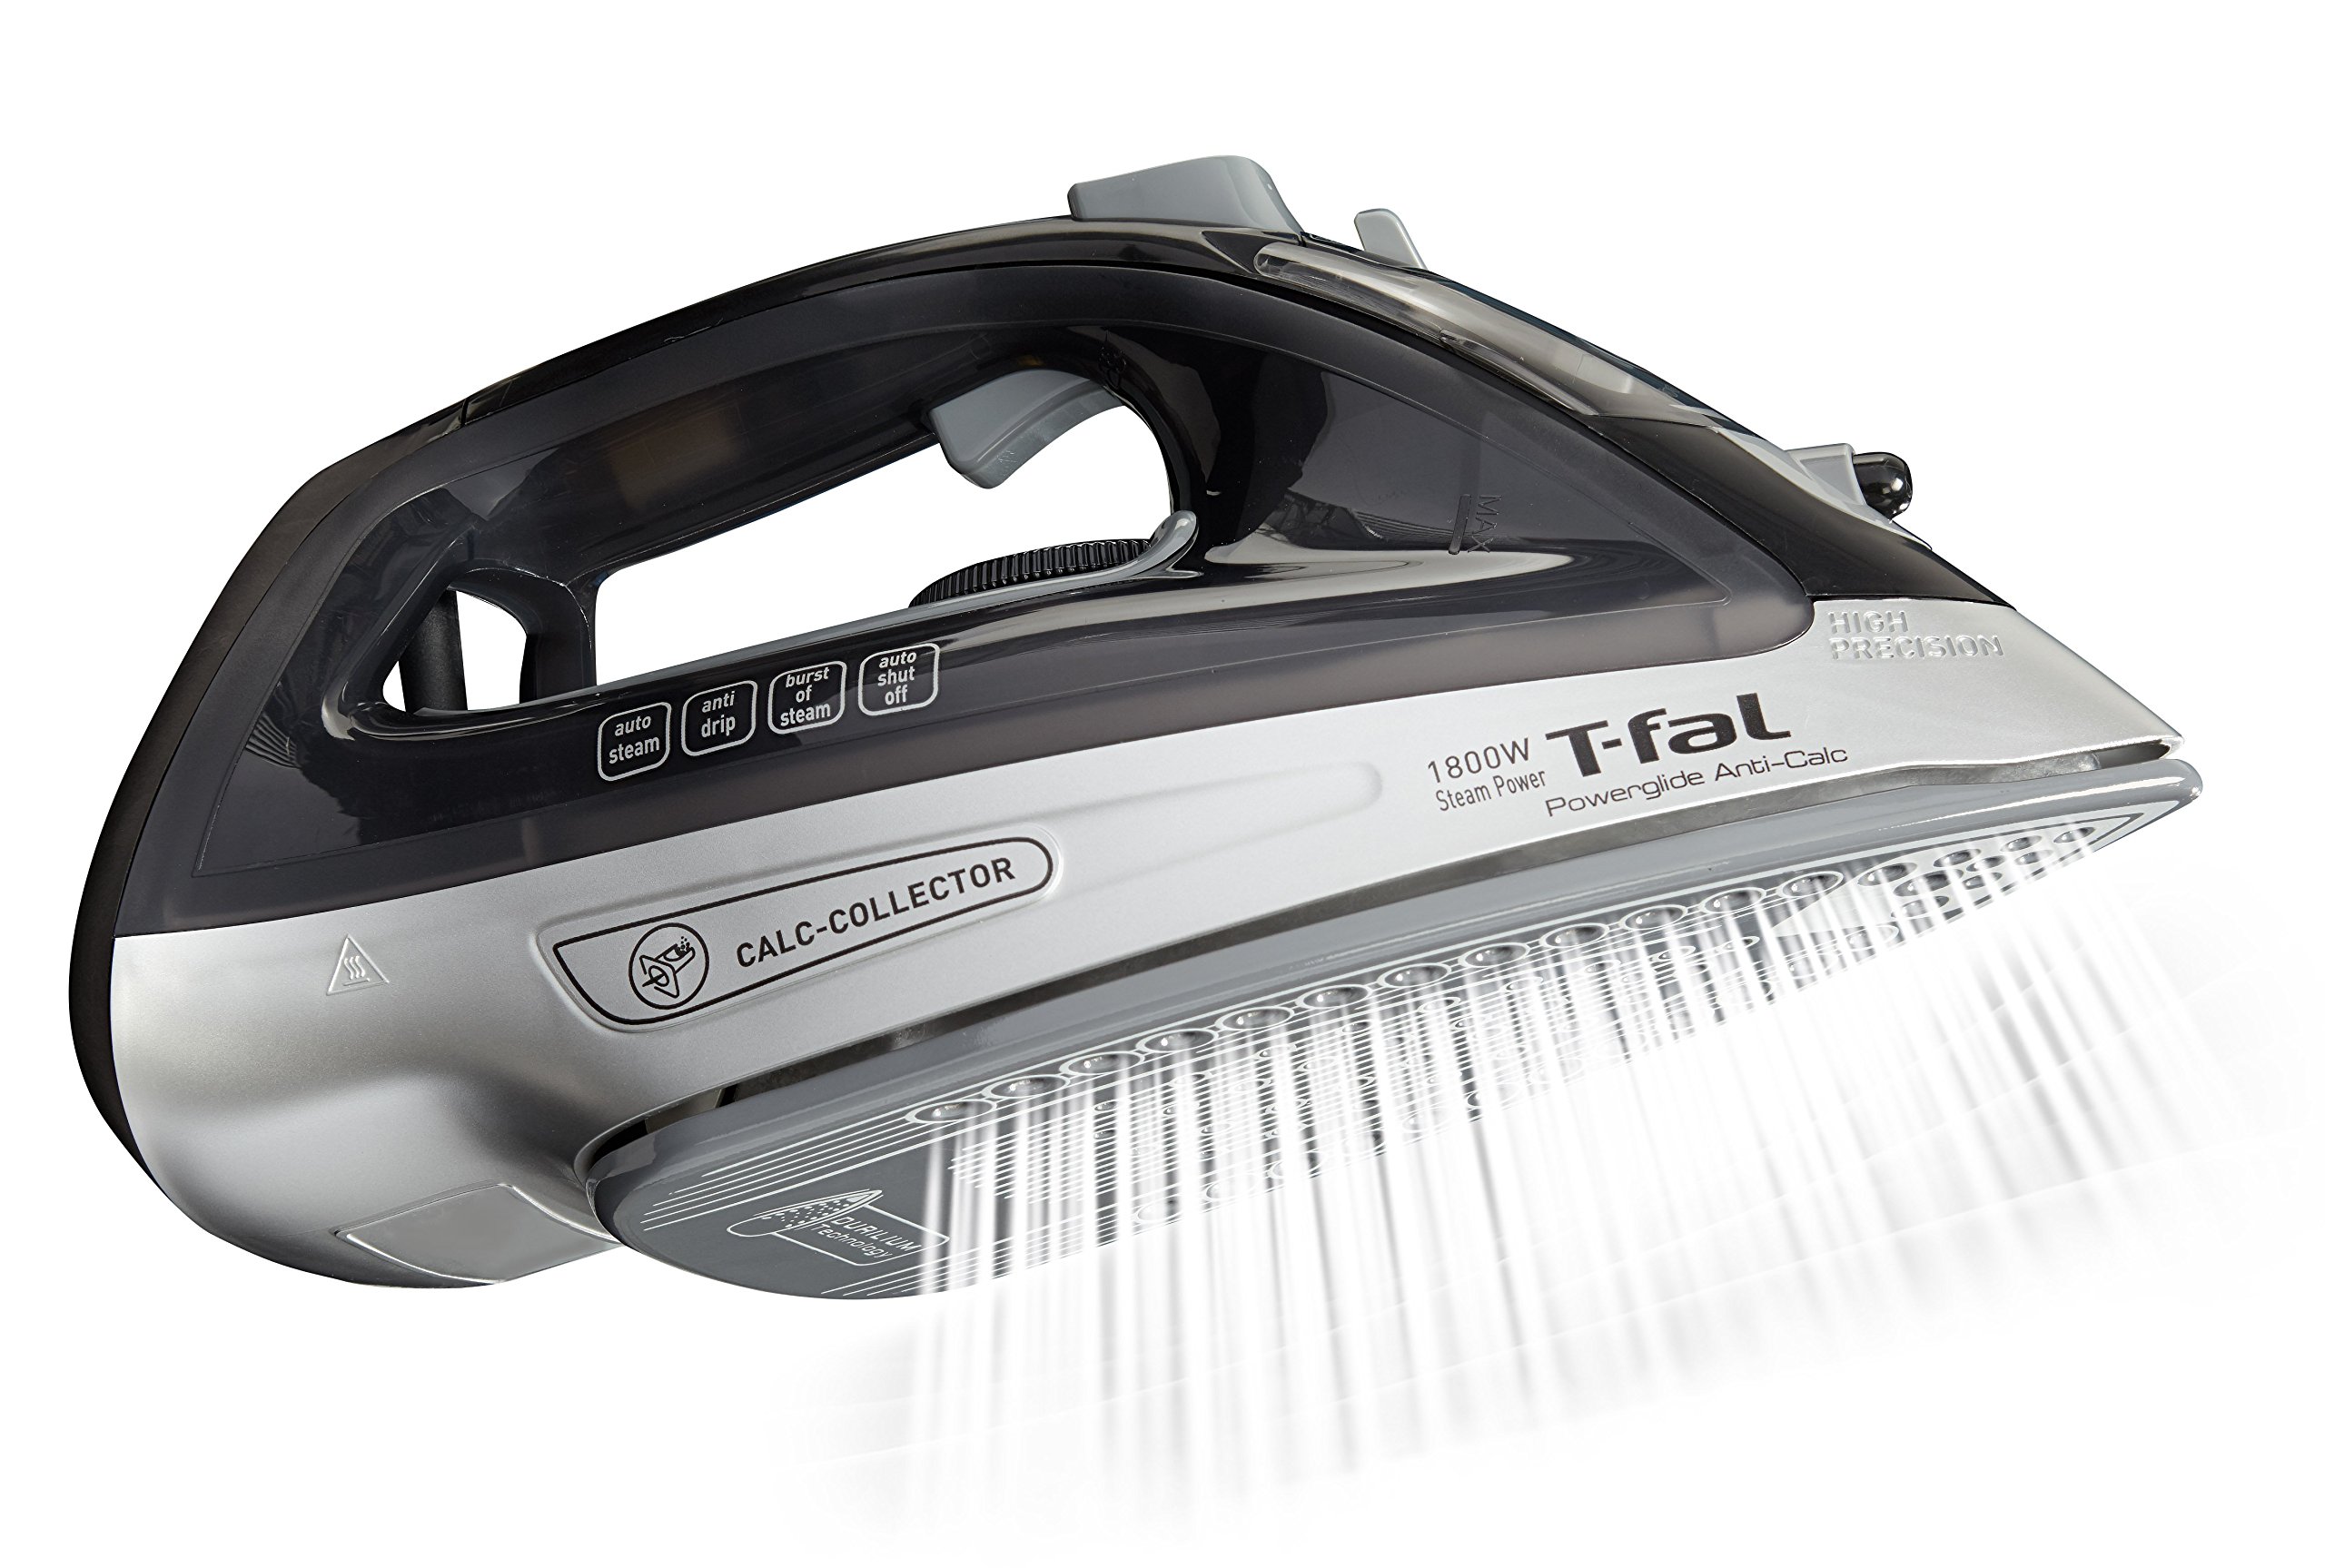 Powerful Steam Burst: Experience Superior Wrinkle Removal with the T-fal FV2640U0 Powerglide Steam Iron